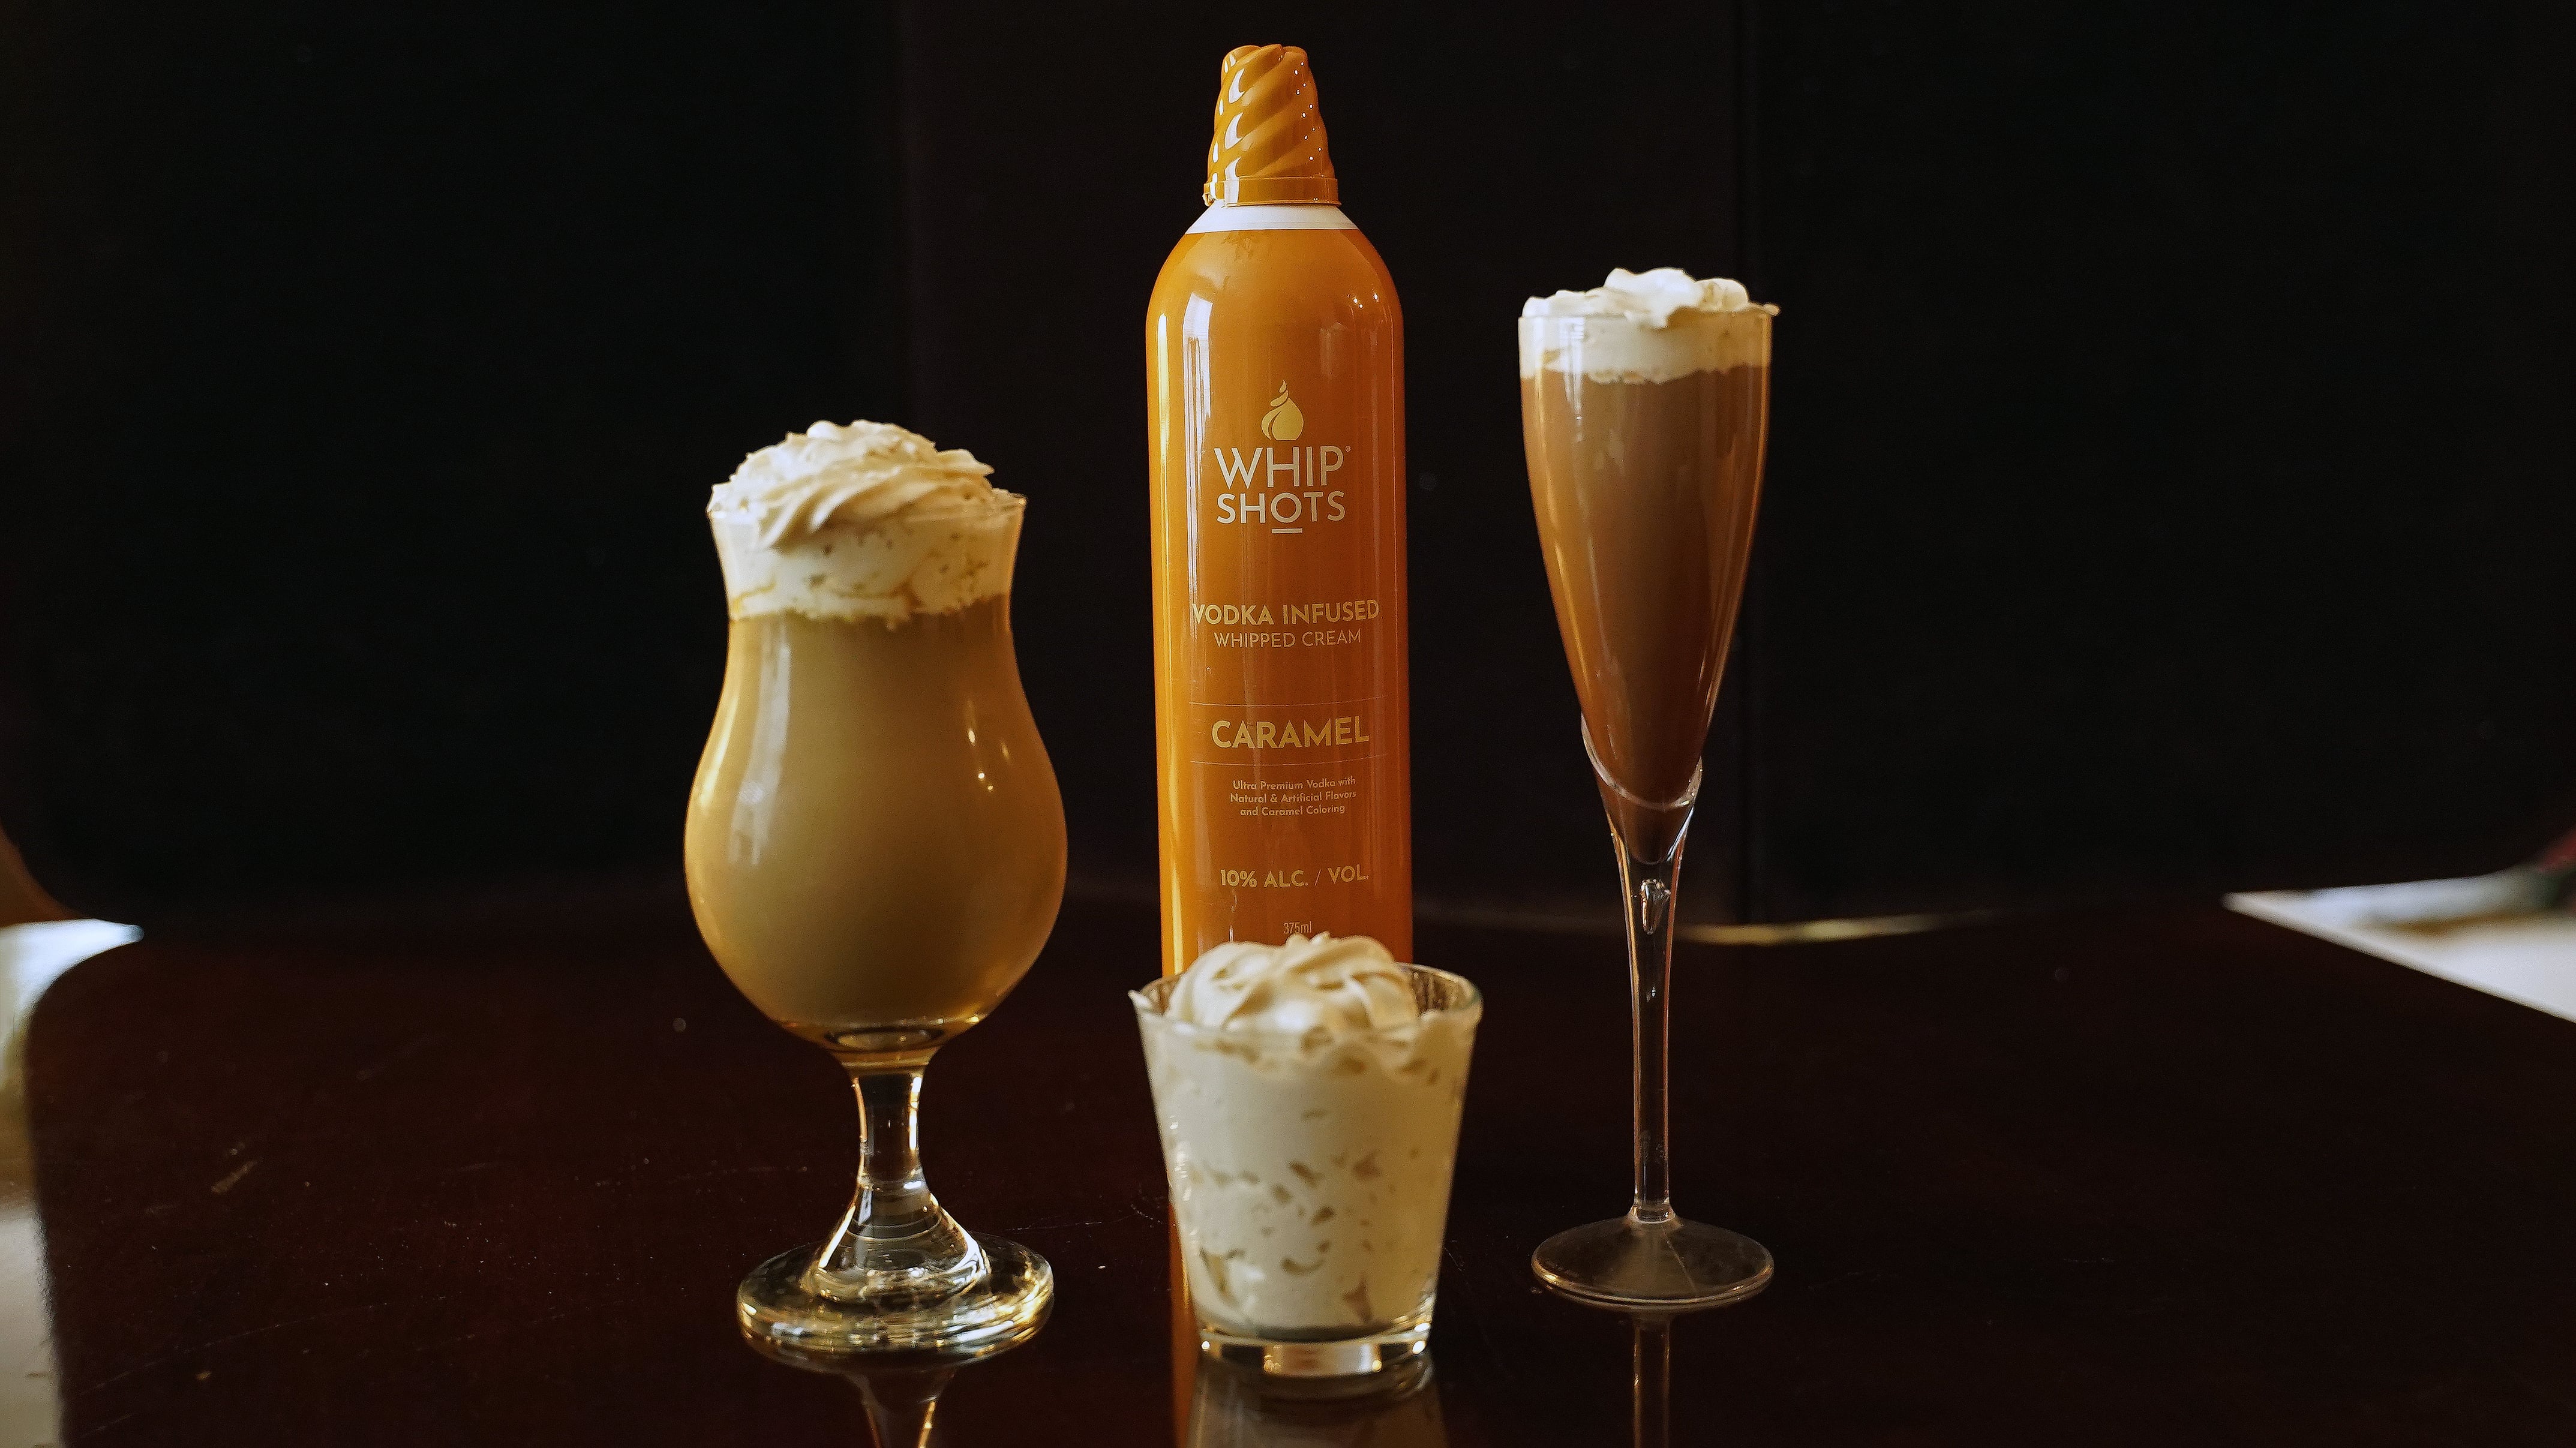 Flavors – Whipshots